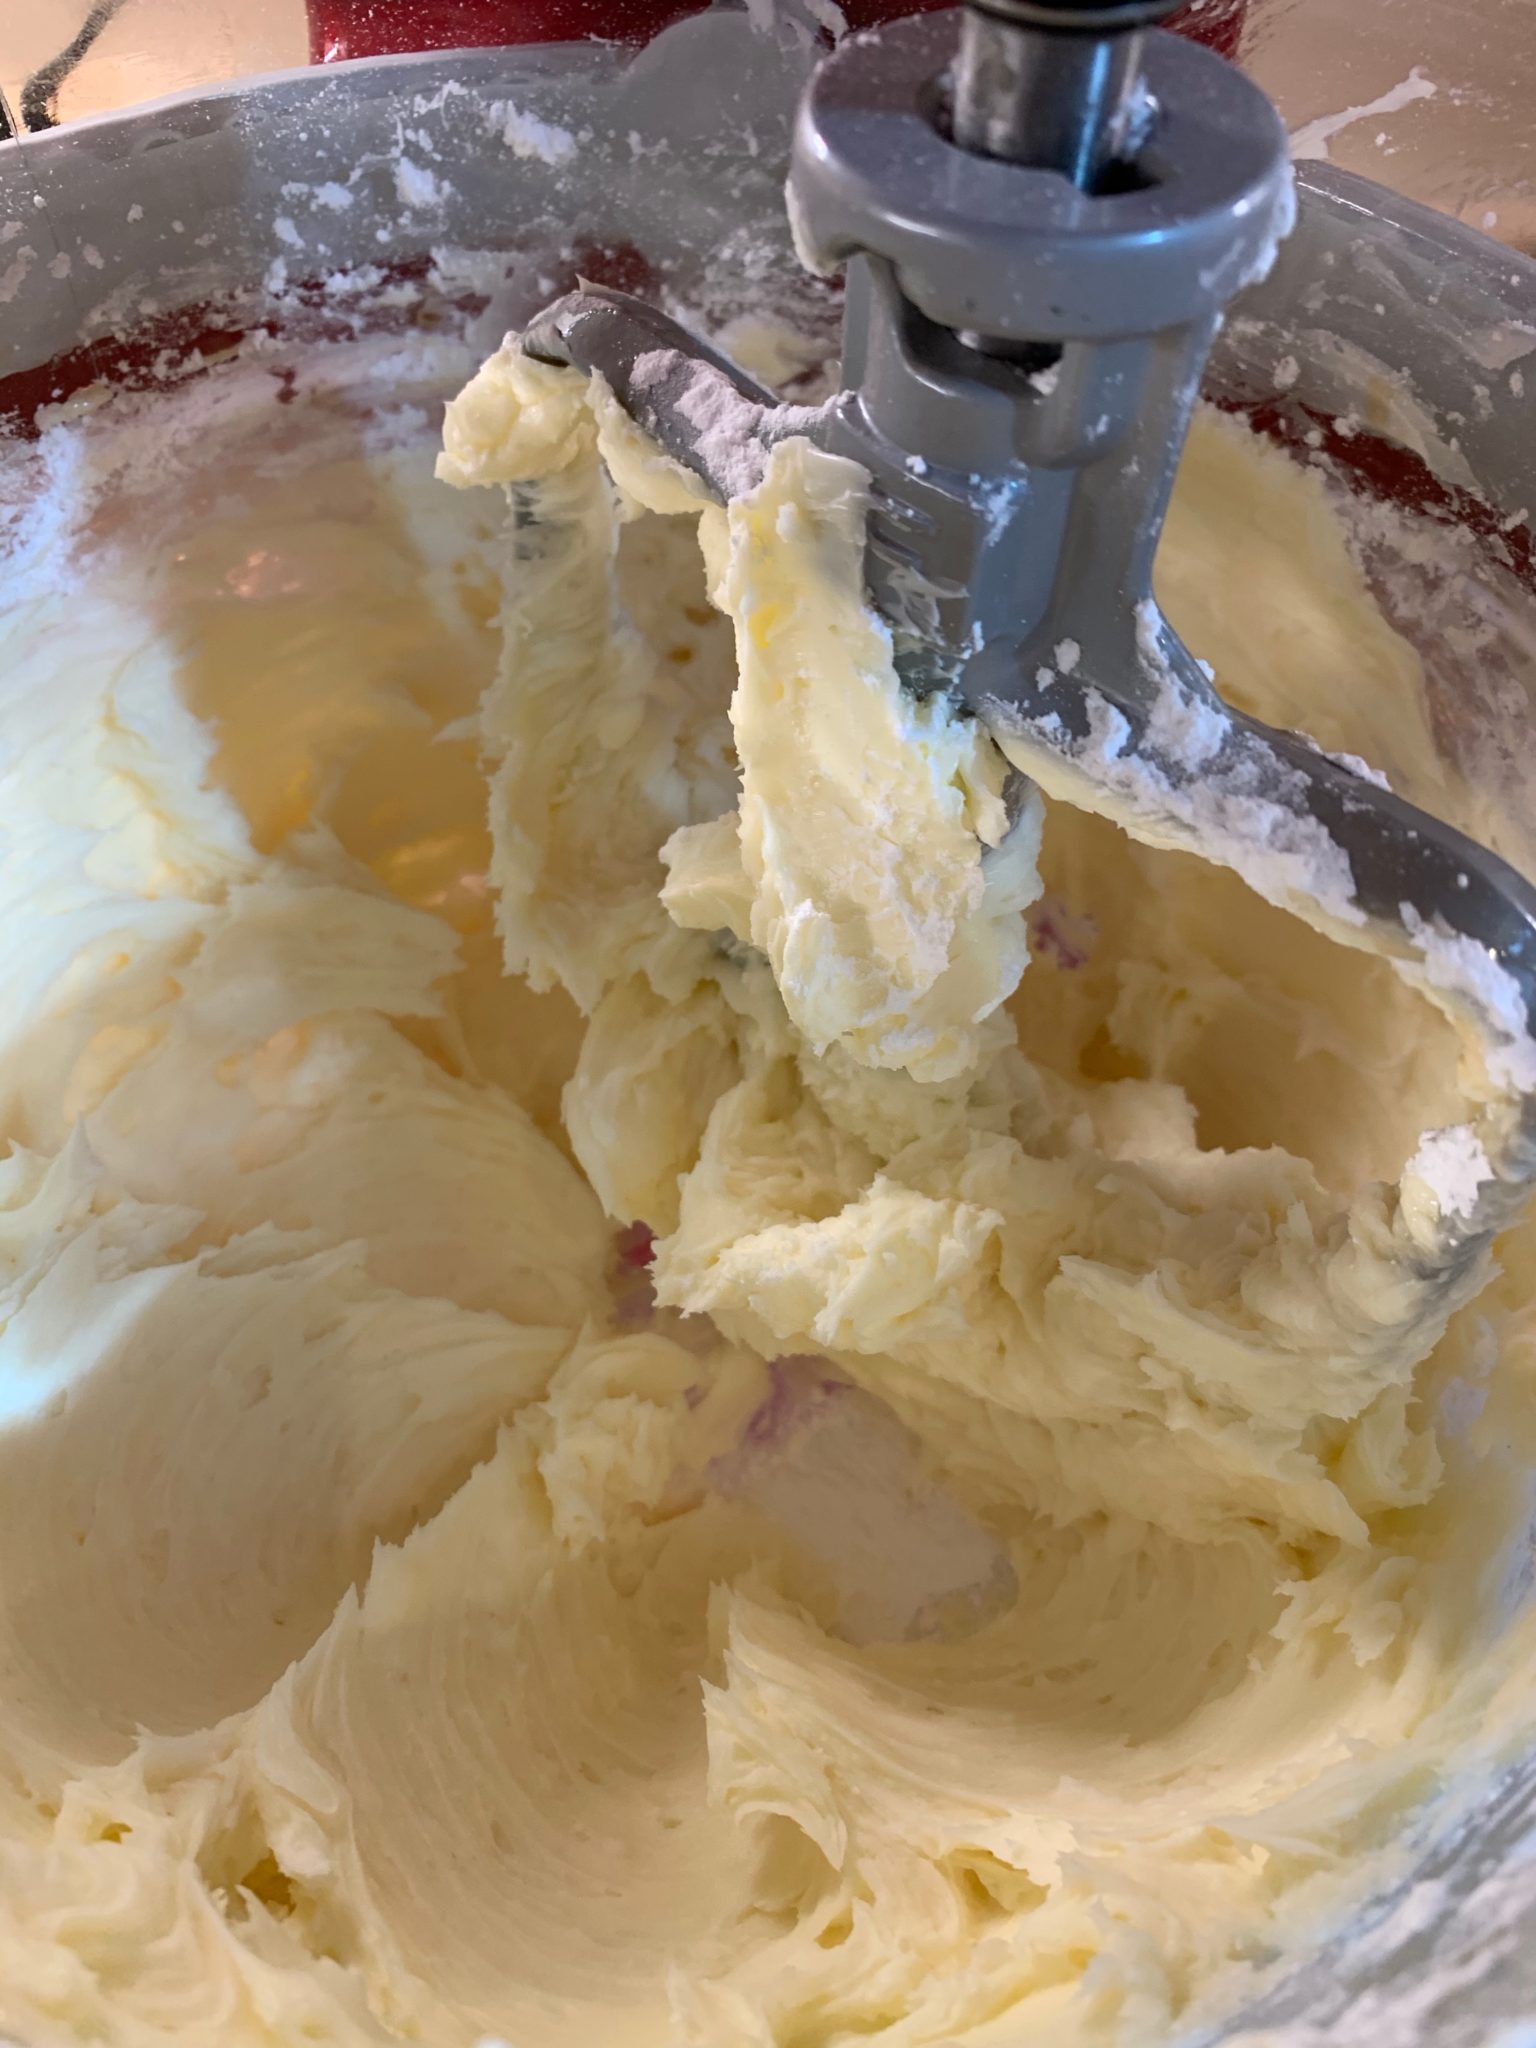 Shortbread dough will become loose as the butter is beaten into the sugar